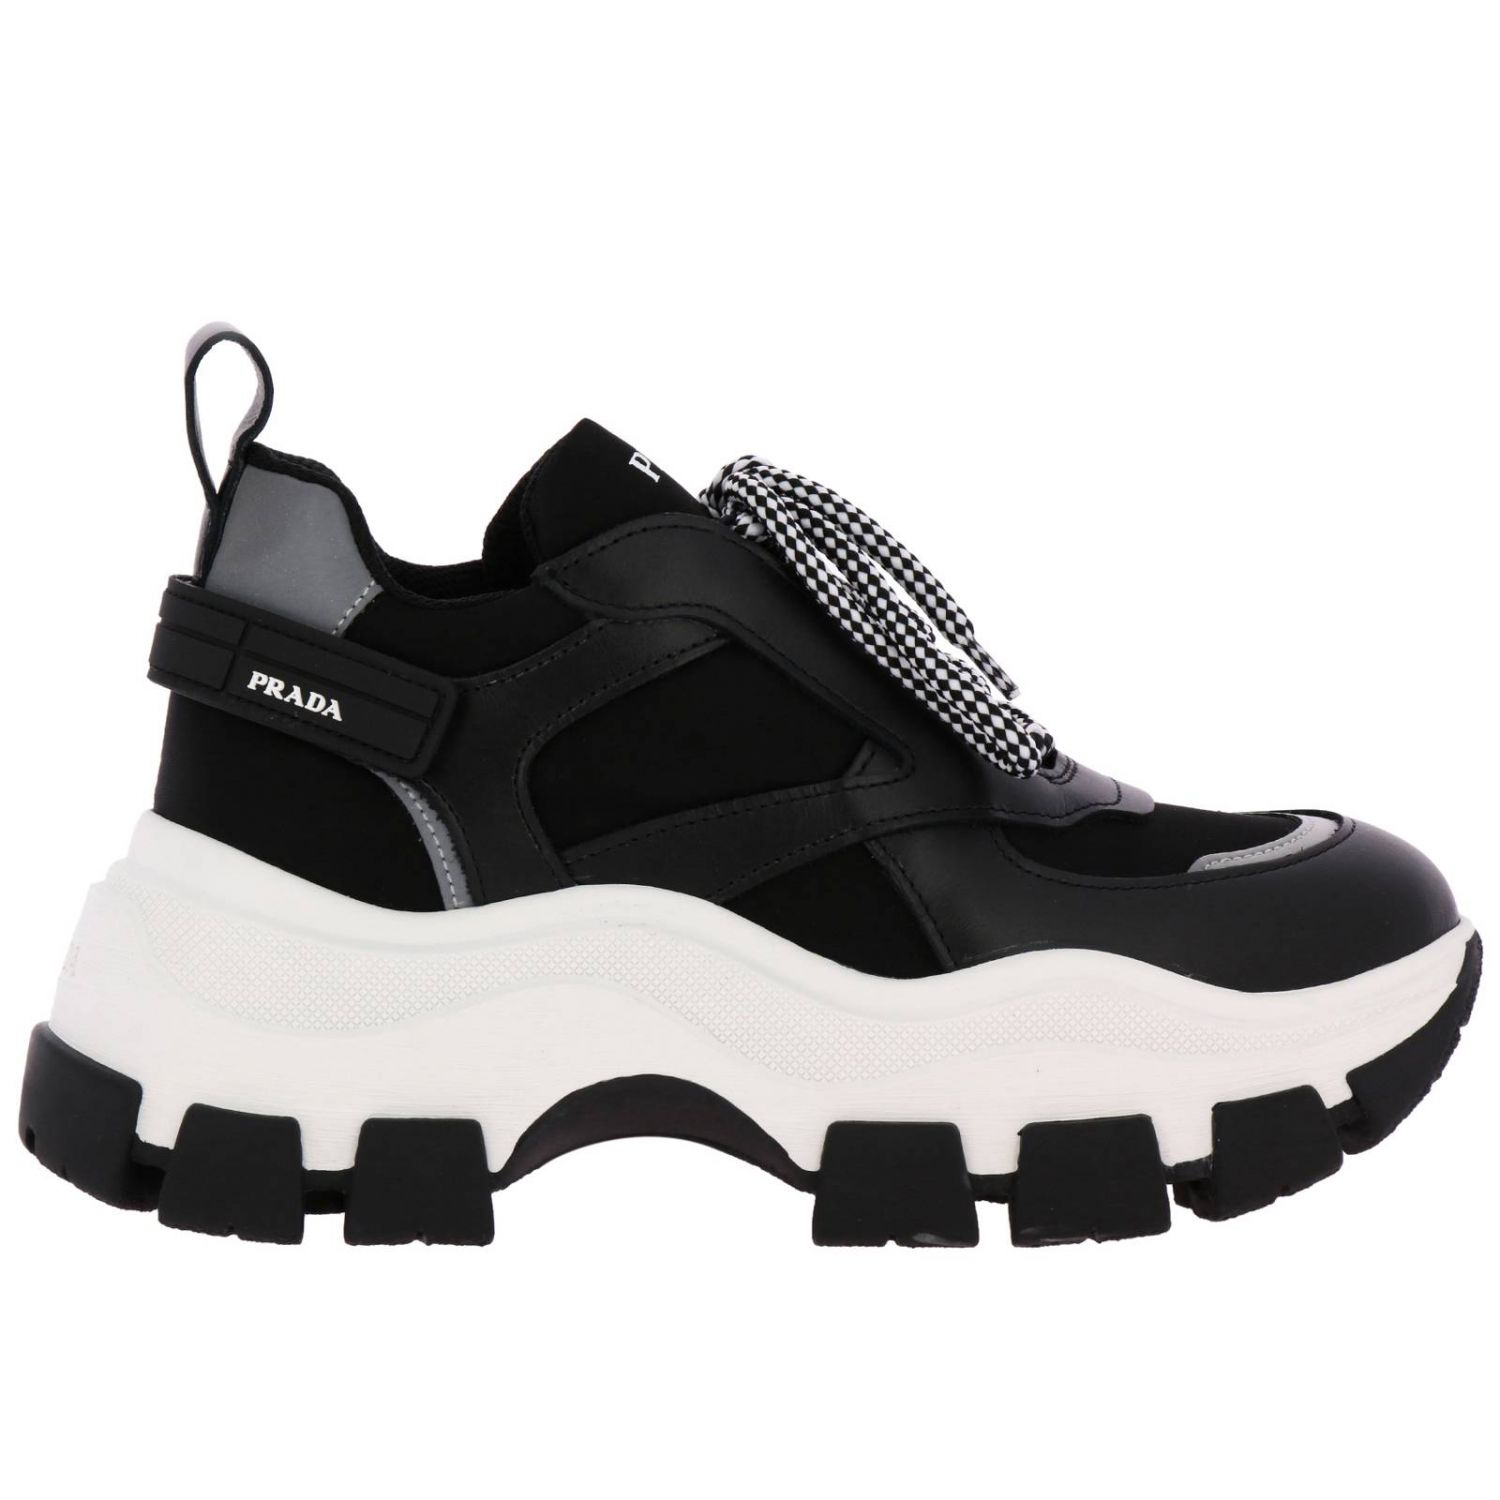 PRADA: Super wedgy lace-up sneakers in nylon and leather with maxi sole -  Black | Prada sneakers 1E586L 3KY9 online on 